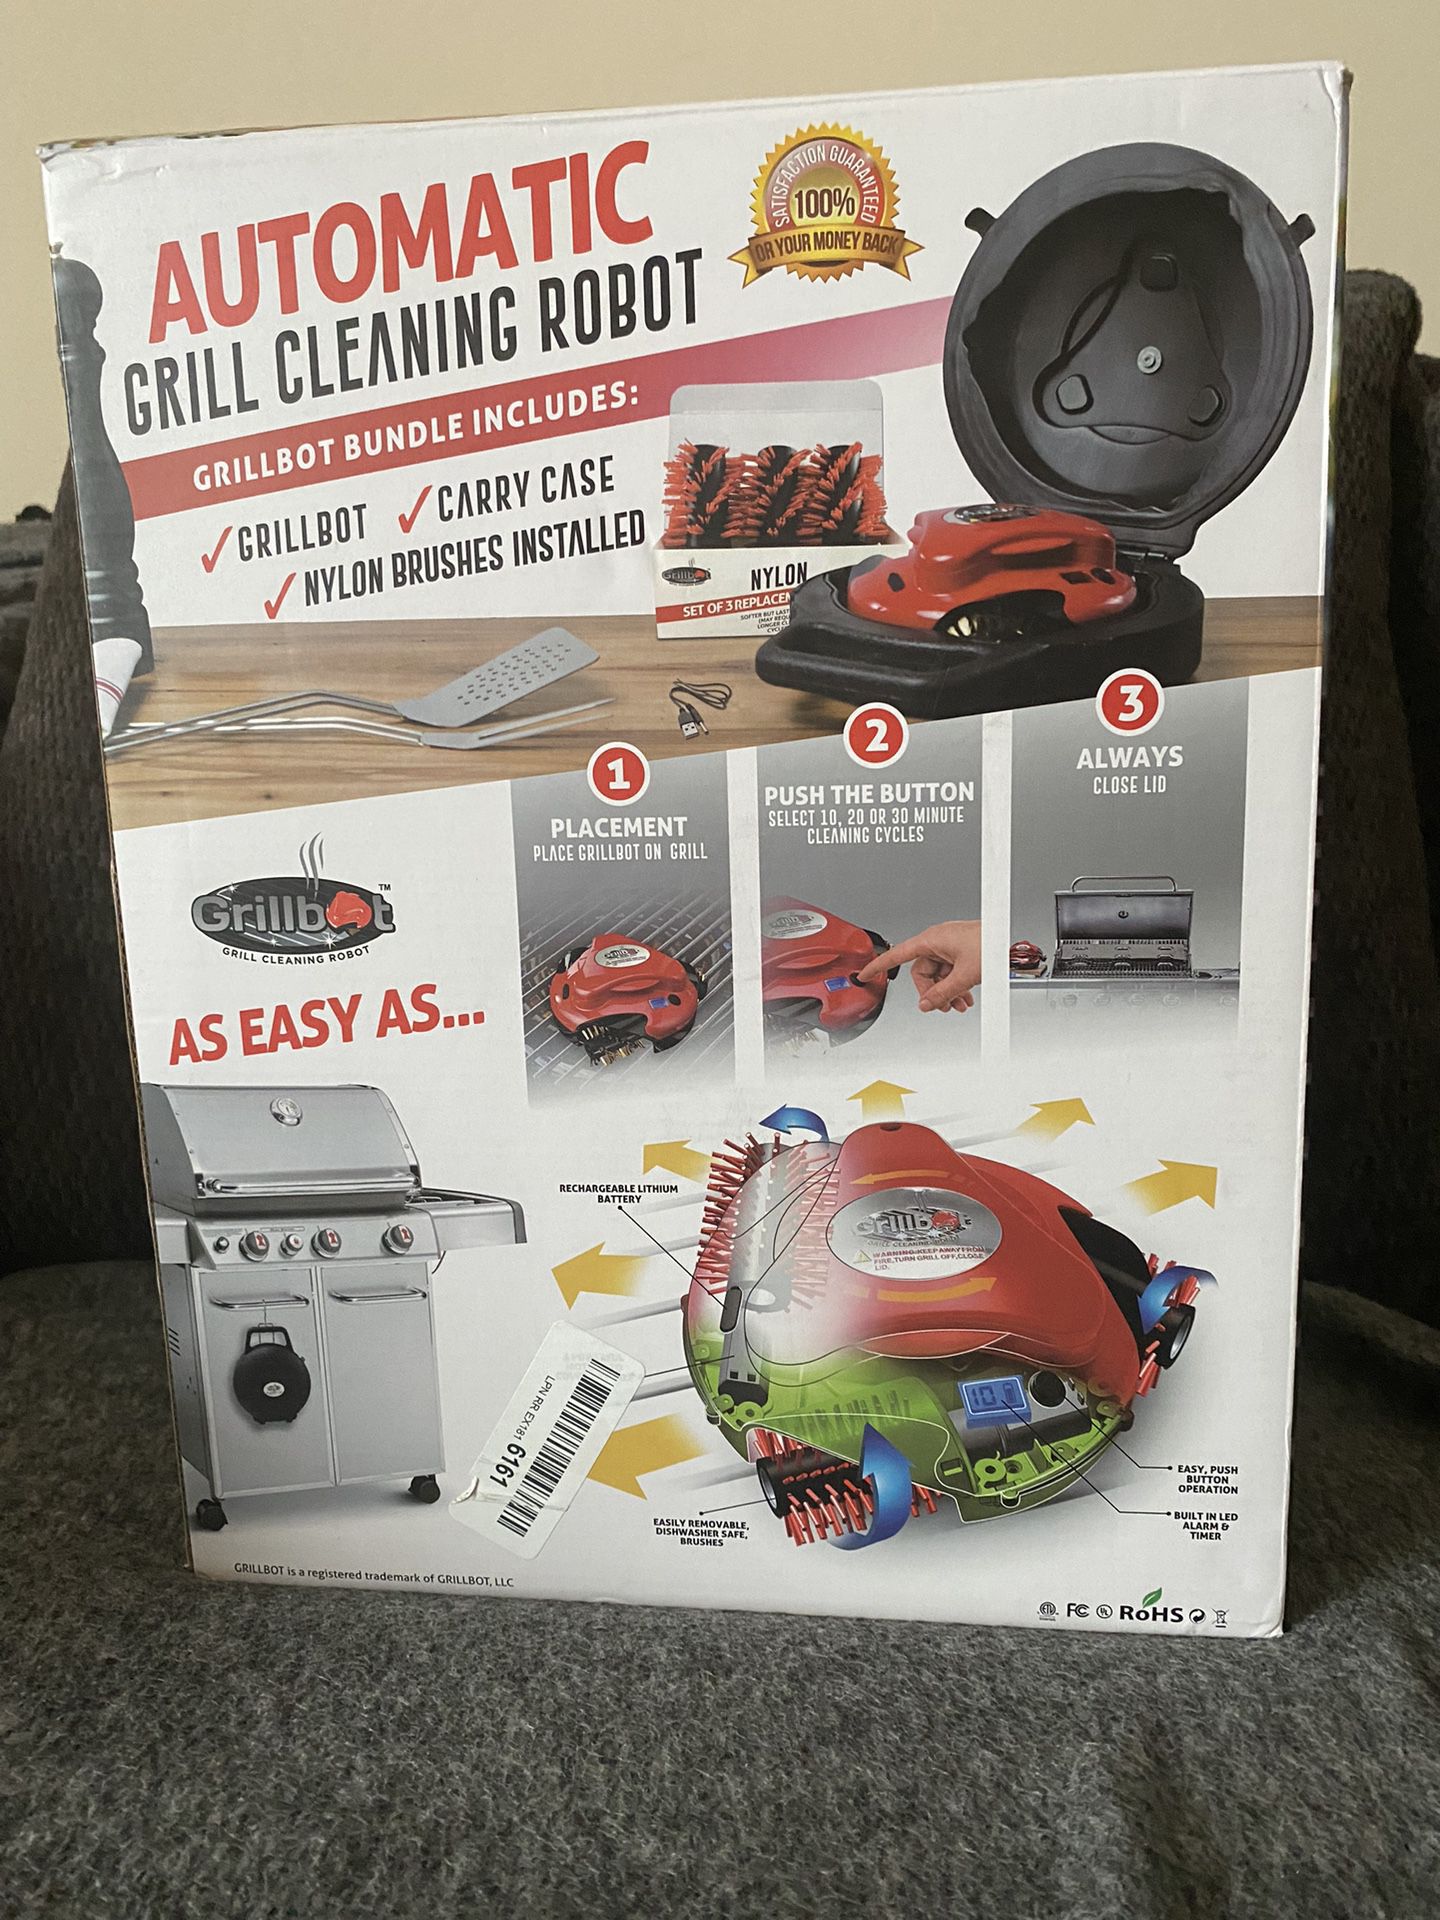 Grillbot Automatic Grill Cleaning Robot with Nylon Brushes - BBQ